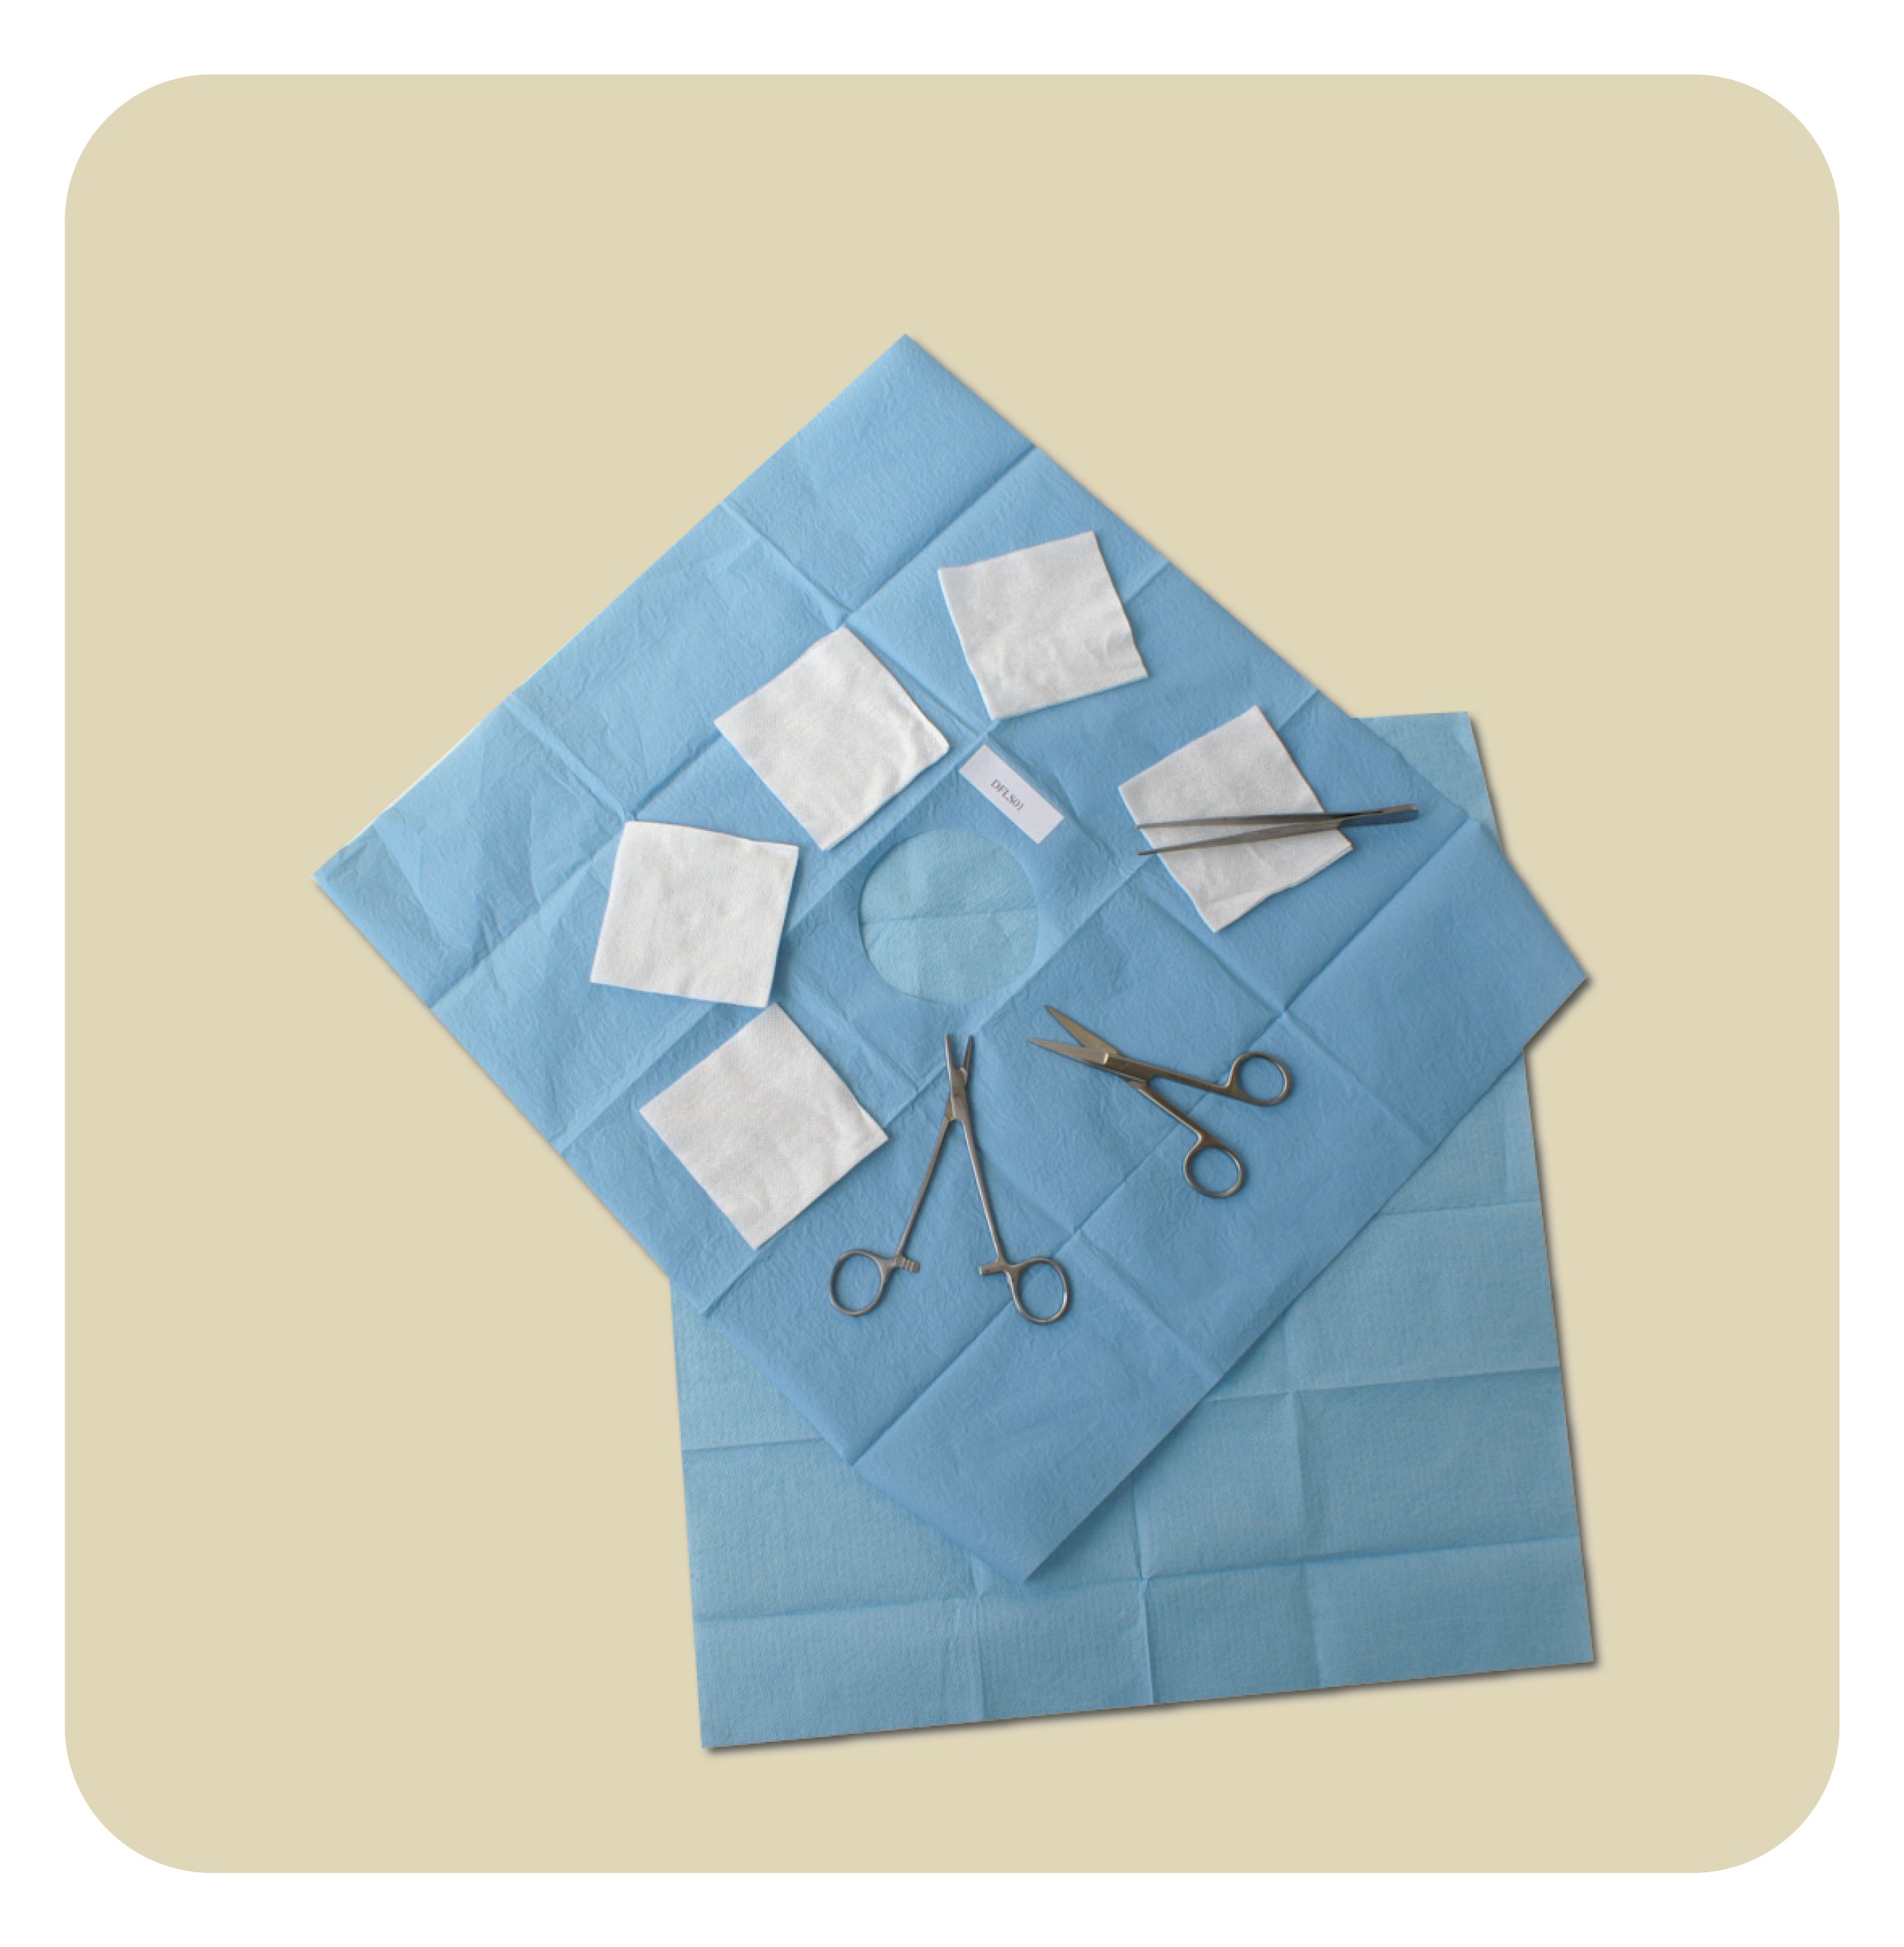 Suture placement sets stainless steel instruments drapes and compresses